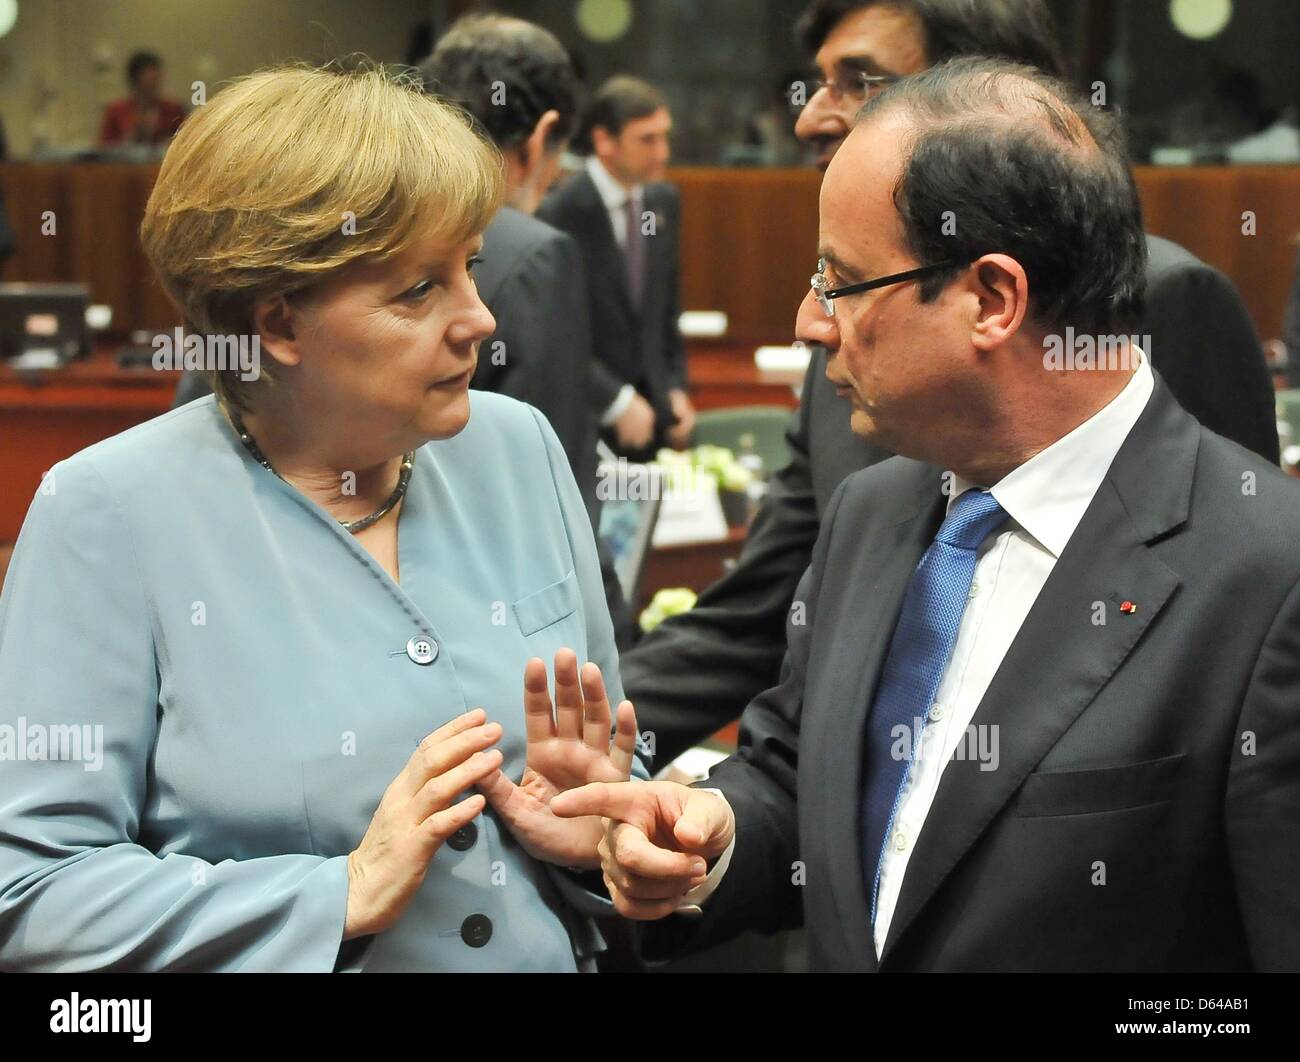 Germany's chancellor Angela Merkel and French president Francois Hollande greet during the EU summit in Brussels, Belgium, 23 May 2012. The heads of states and heads of governments of the 27 EU states have come together to speak about economical growth as a way out of the crisis. Topics discussed will be a possible tax on financial deals as well as eurobonds. Photo: Felix Kinderman Stock Photo